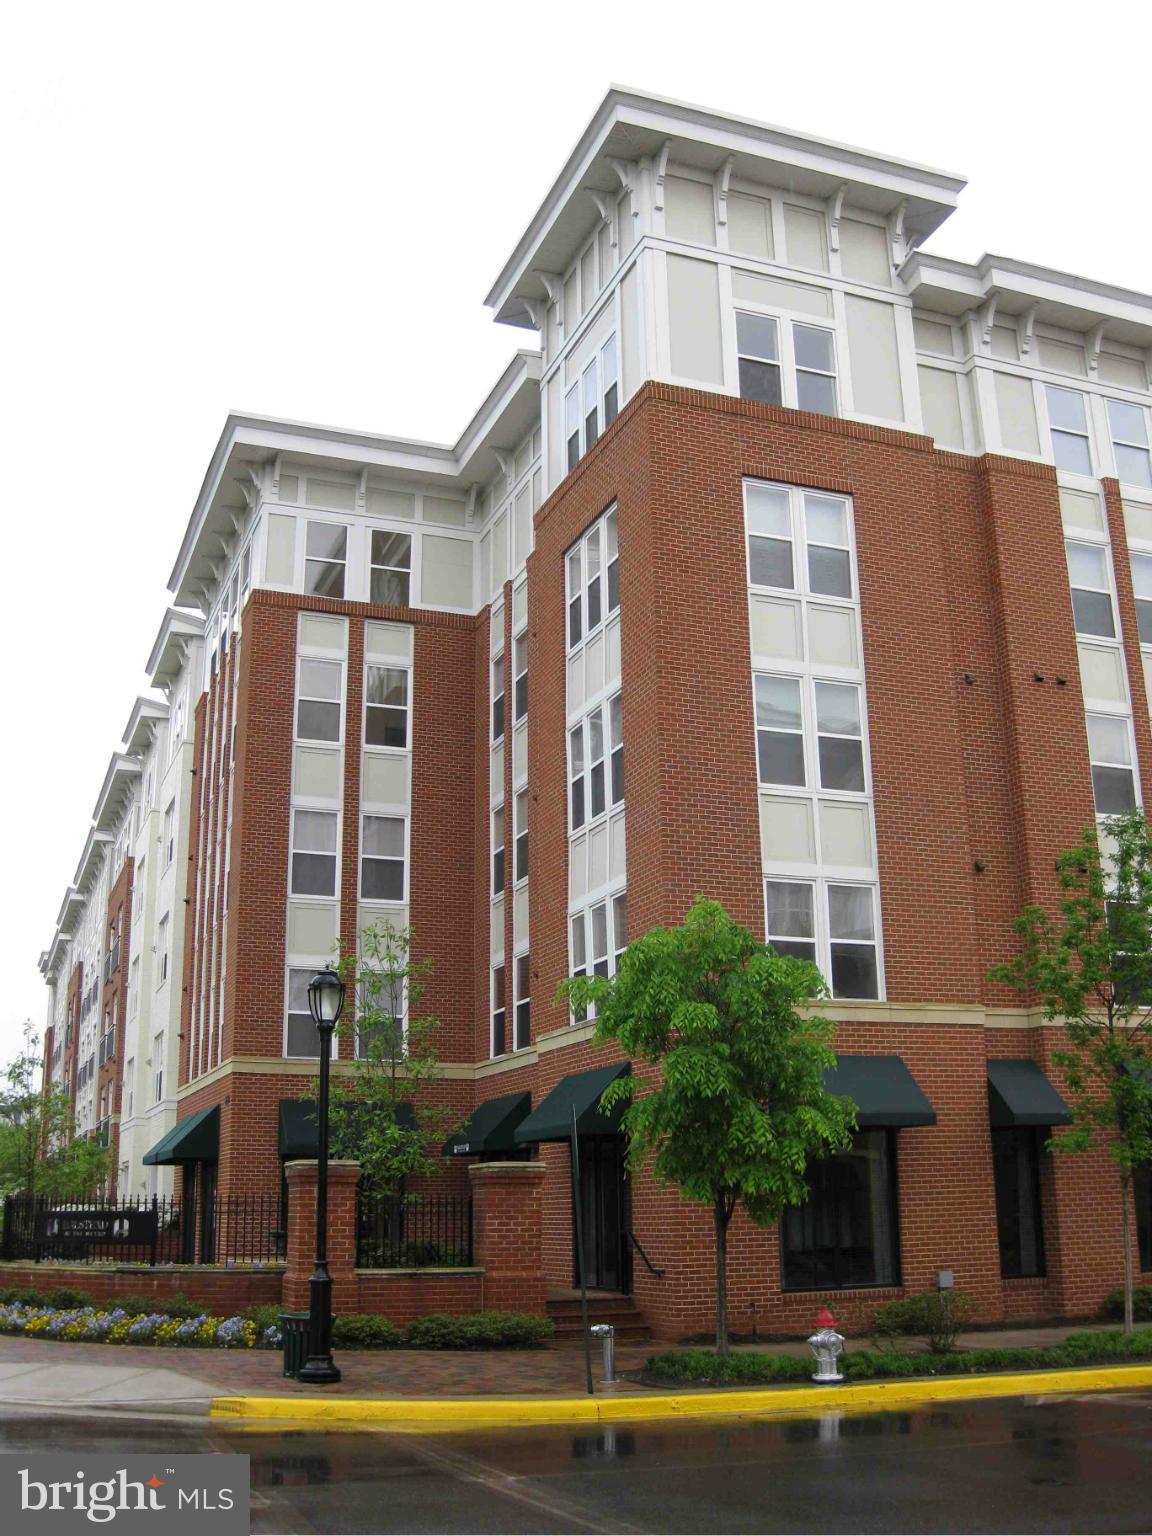 a front view of multi story residential apartment building with yard and seating space